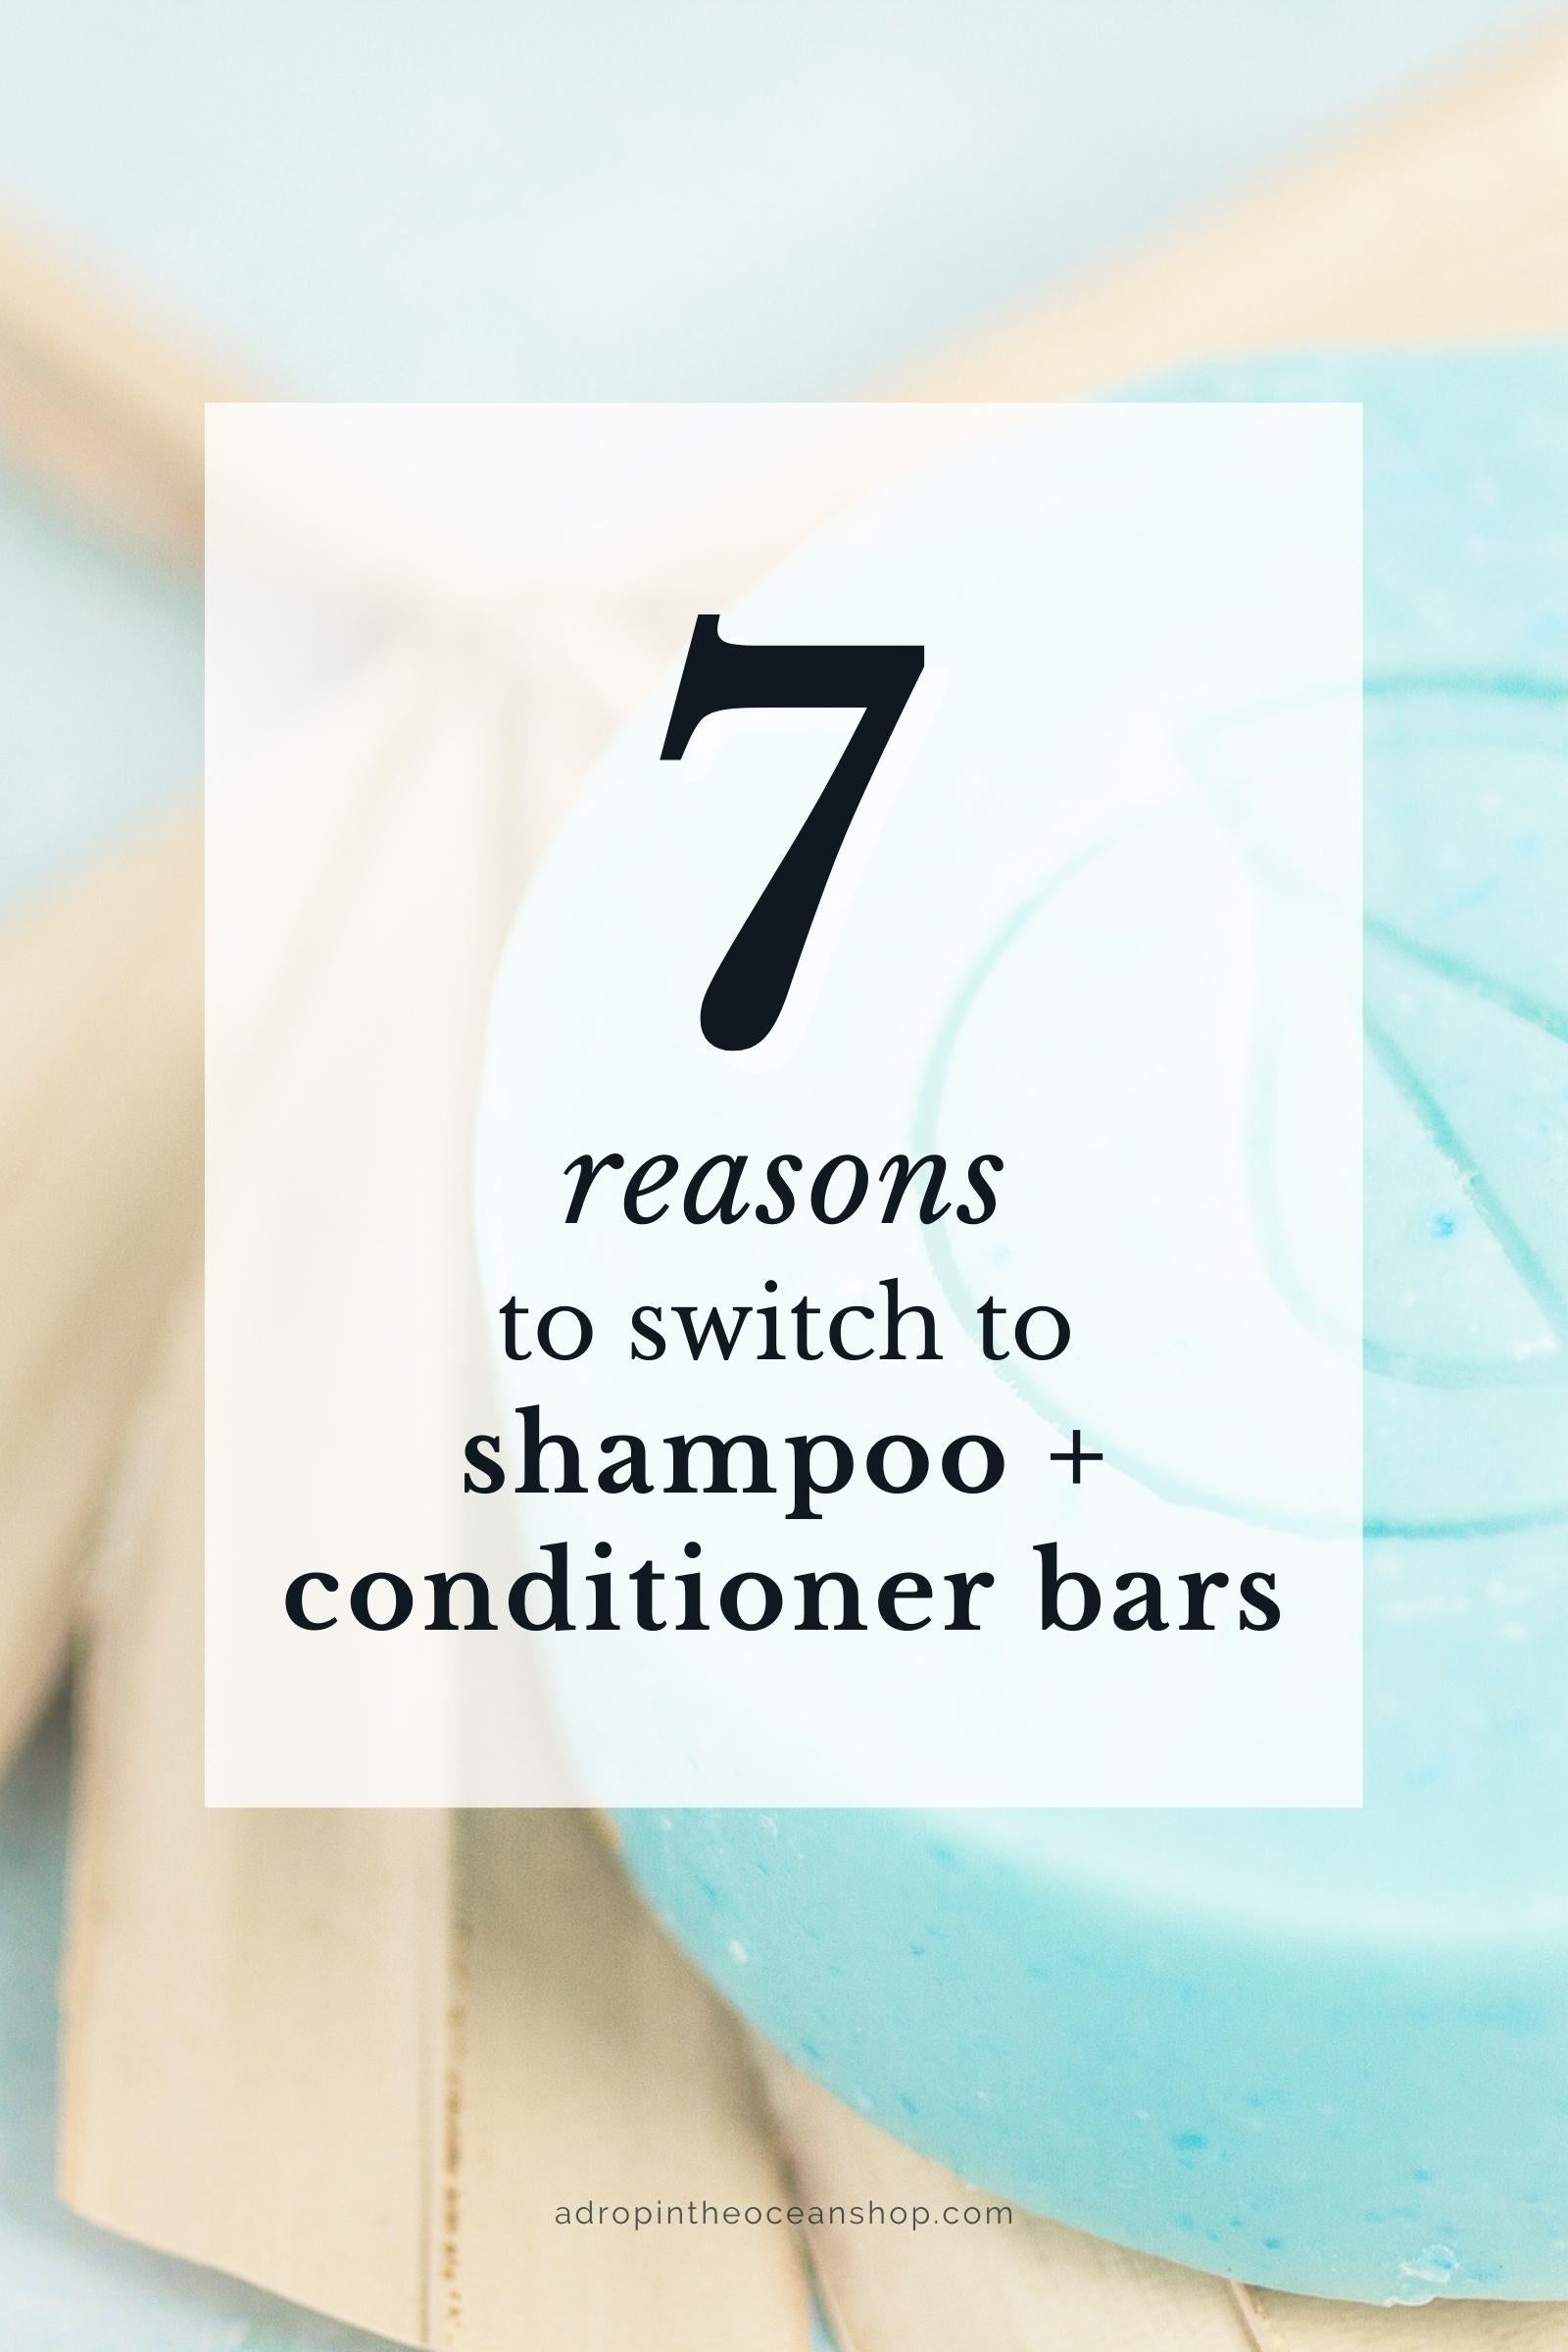 7 Reasons to Switch to Shampoo + Conditioner Bars